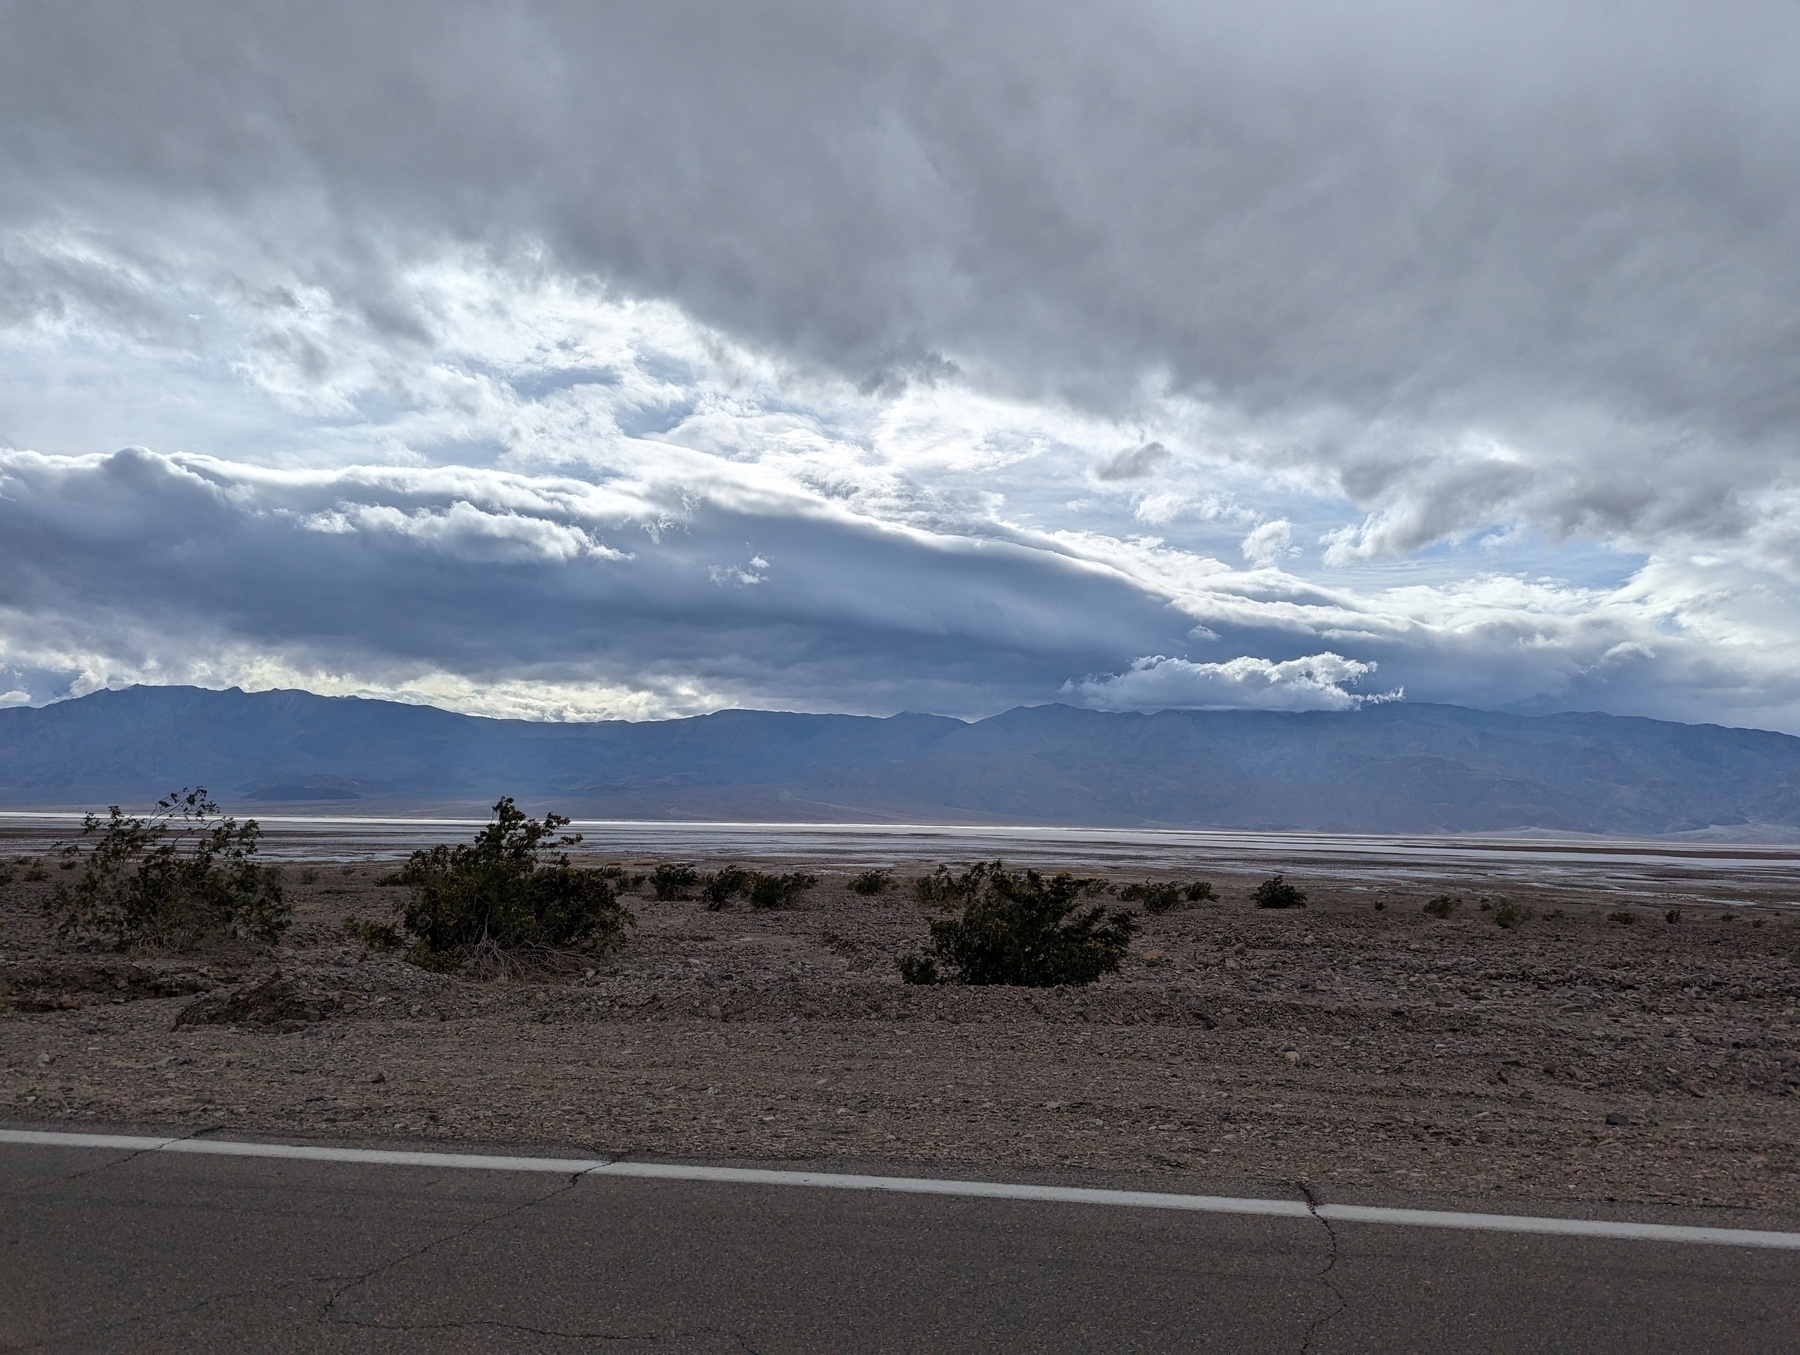 A roughly southern view of clouds, mountains and brush Tuesday, March 14, 2023 along eastbound Highway 190 lanes in Death Valley National Park between Stovepipe Wells and Furnace Creek.